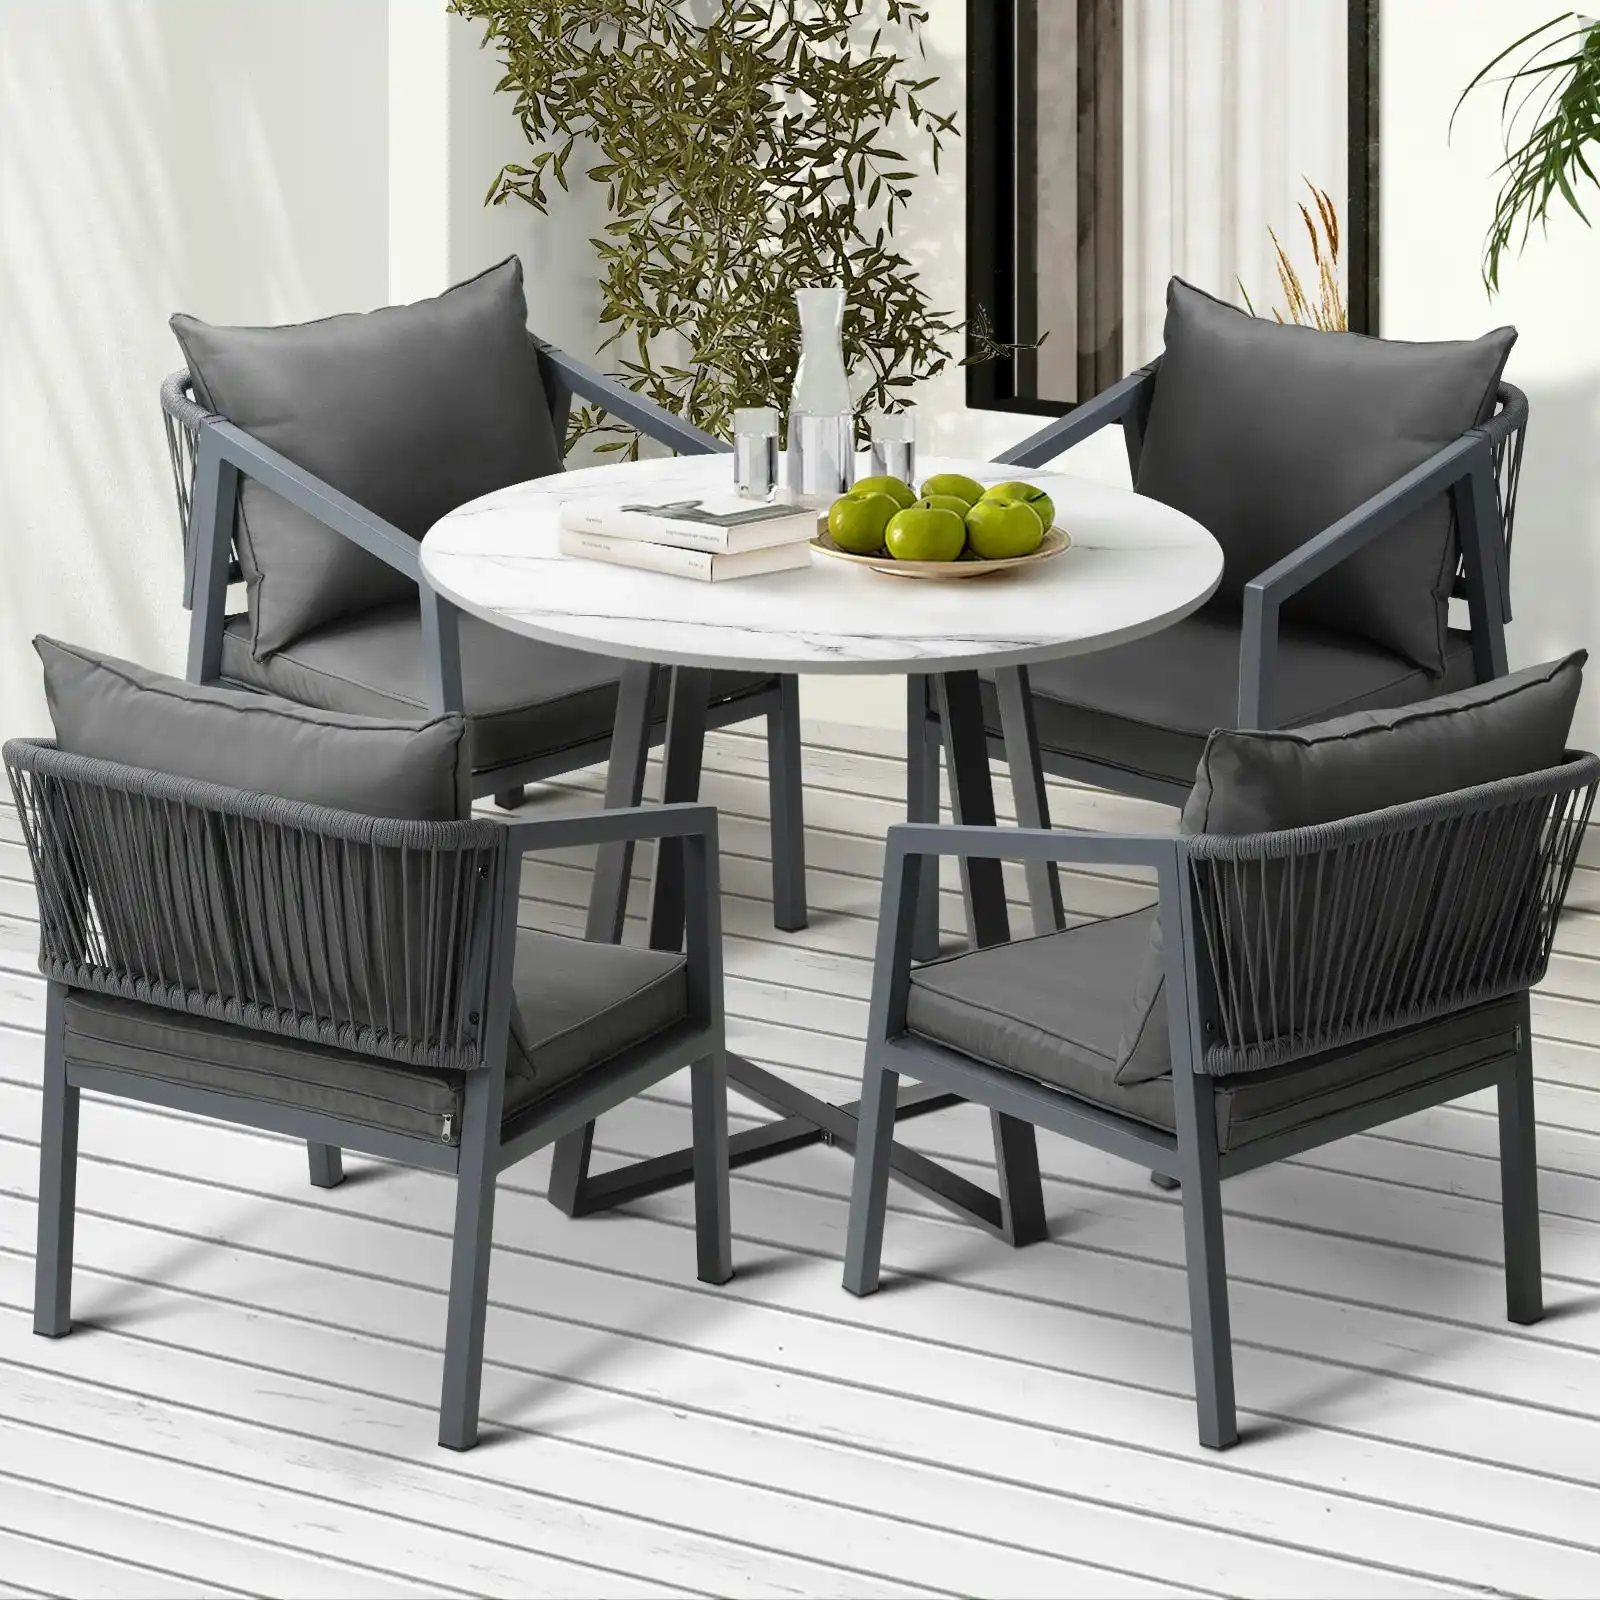 Livsip 5PCS Outdoor Dining Setting Table Lounge Chair Patio Furniture Bistro Set